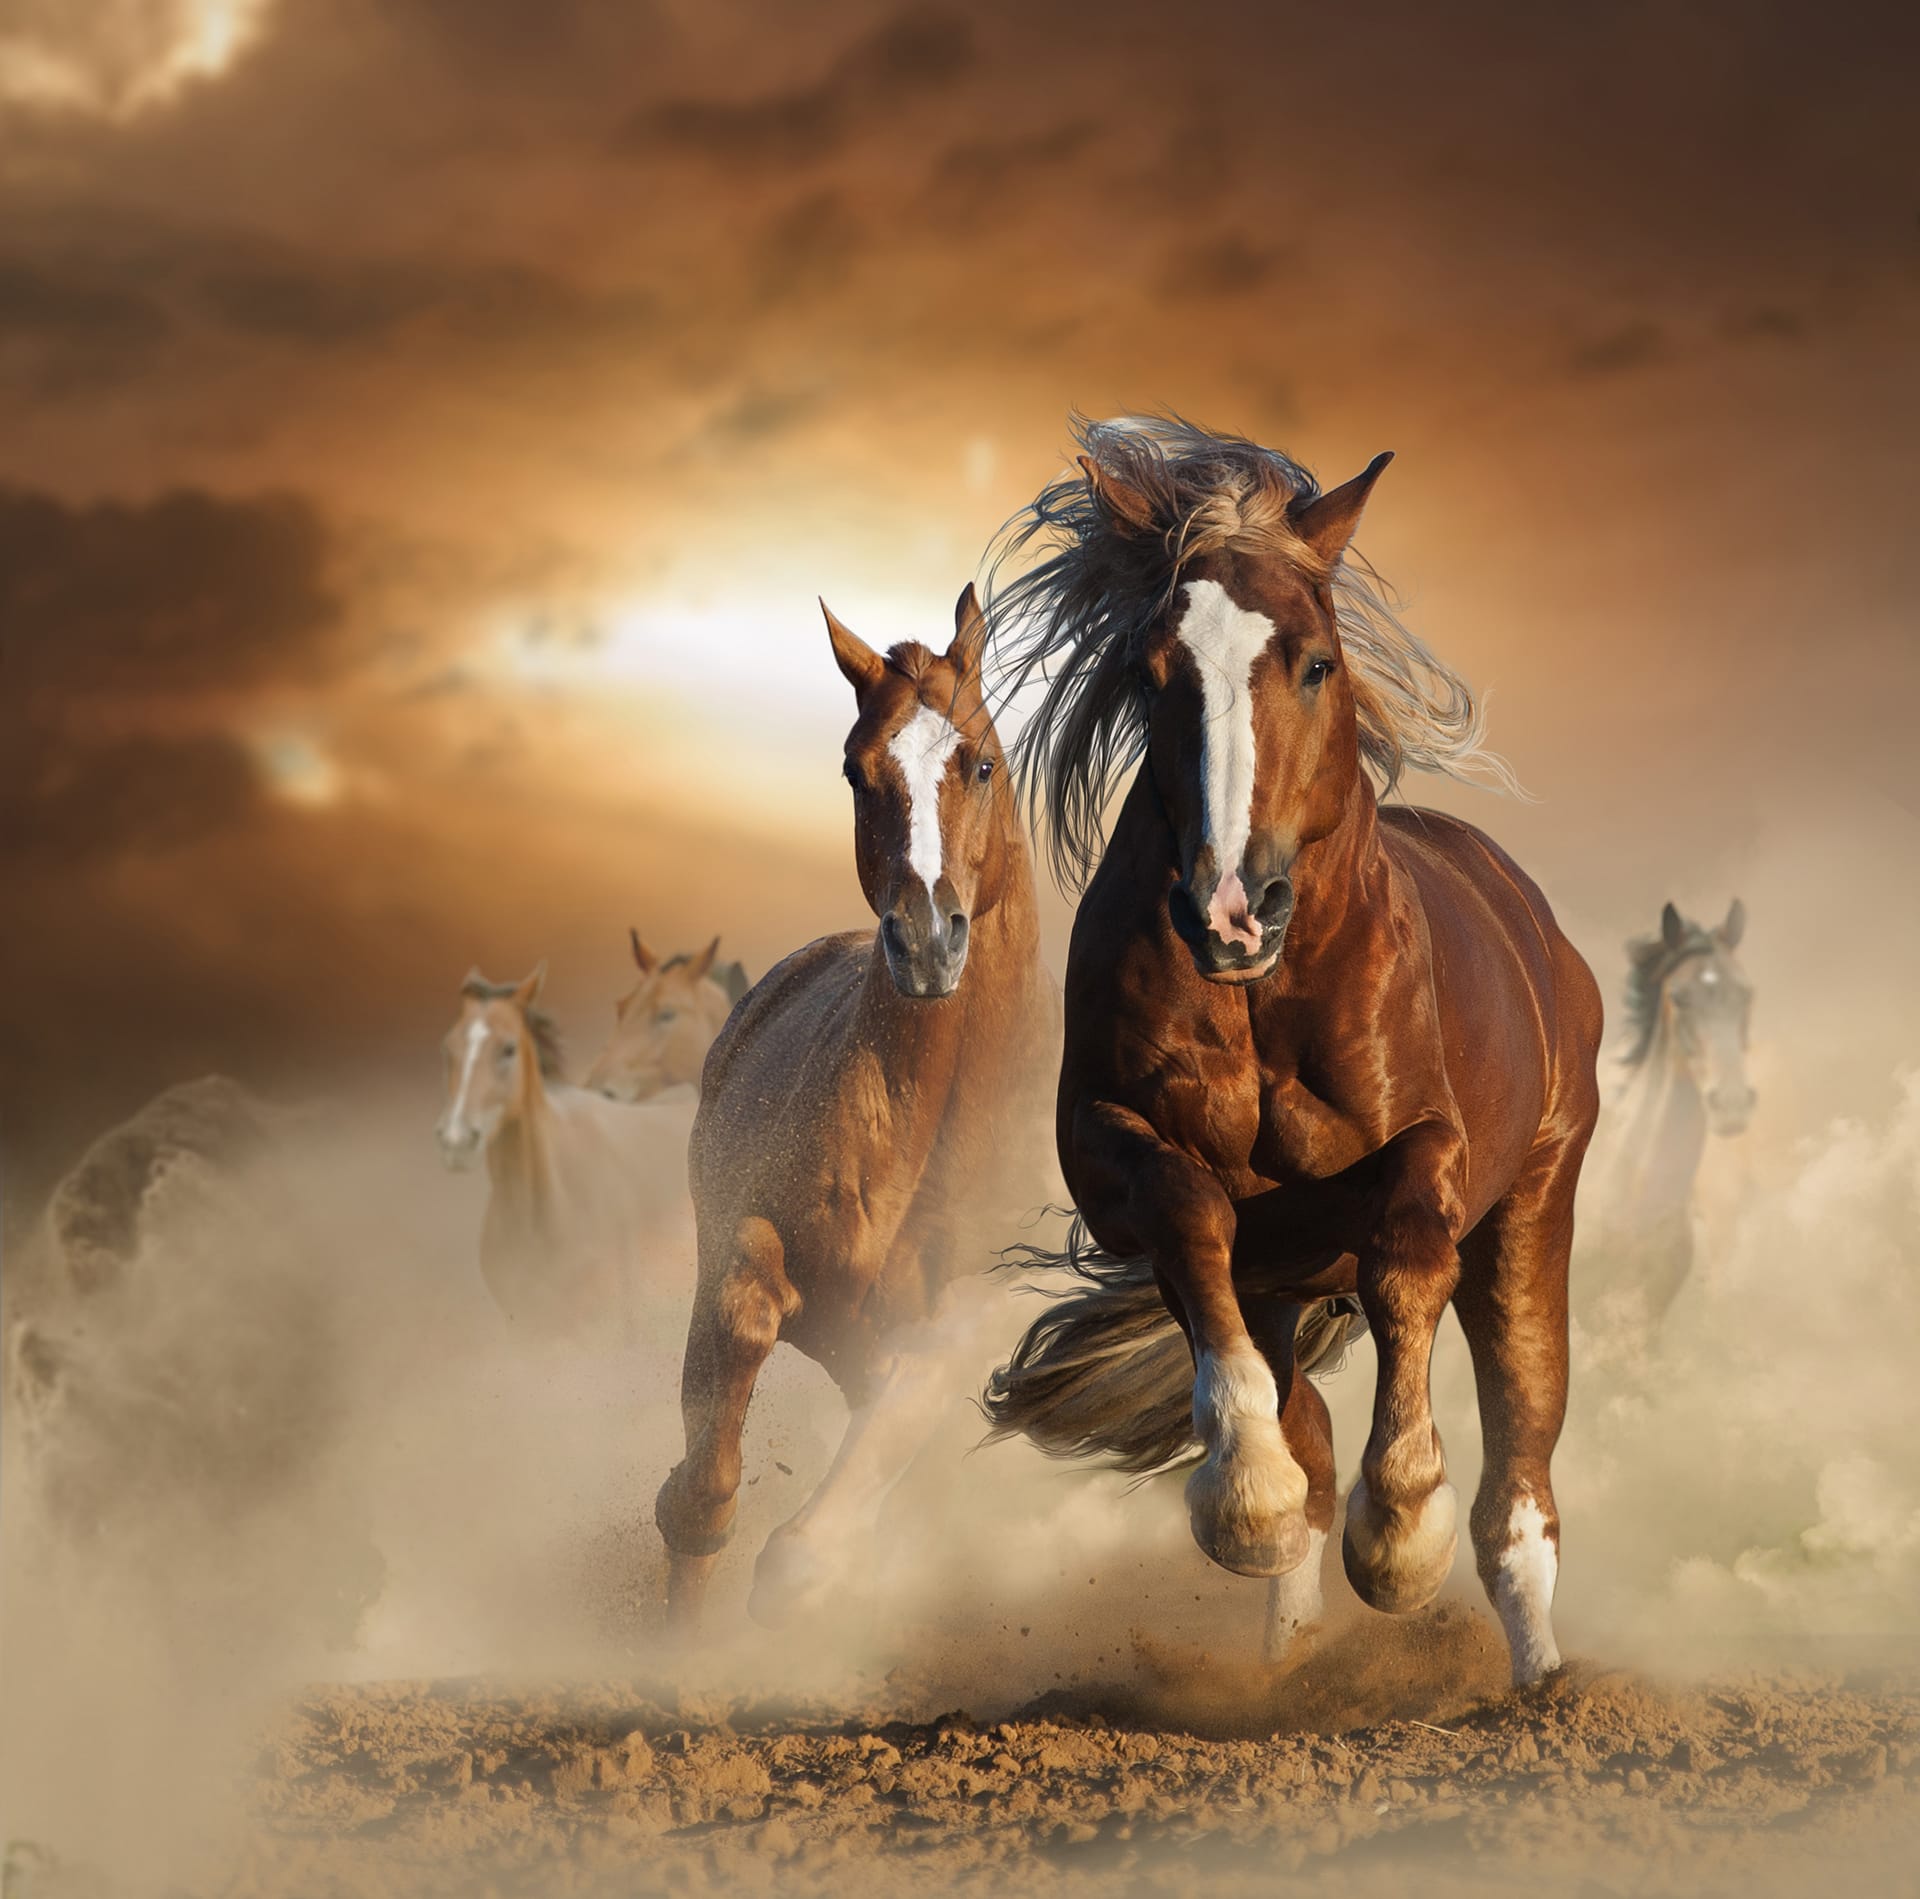 Two wild chestnut horses running together dust front view